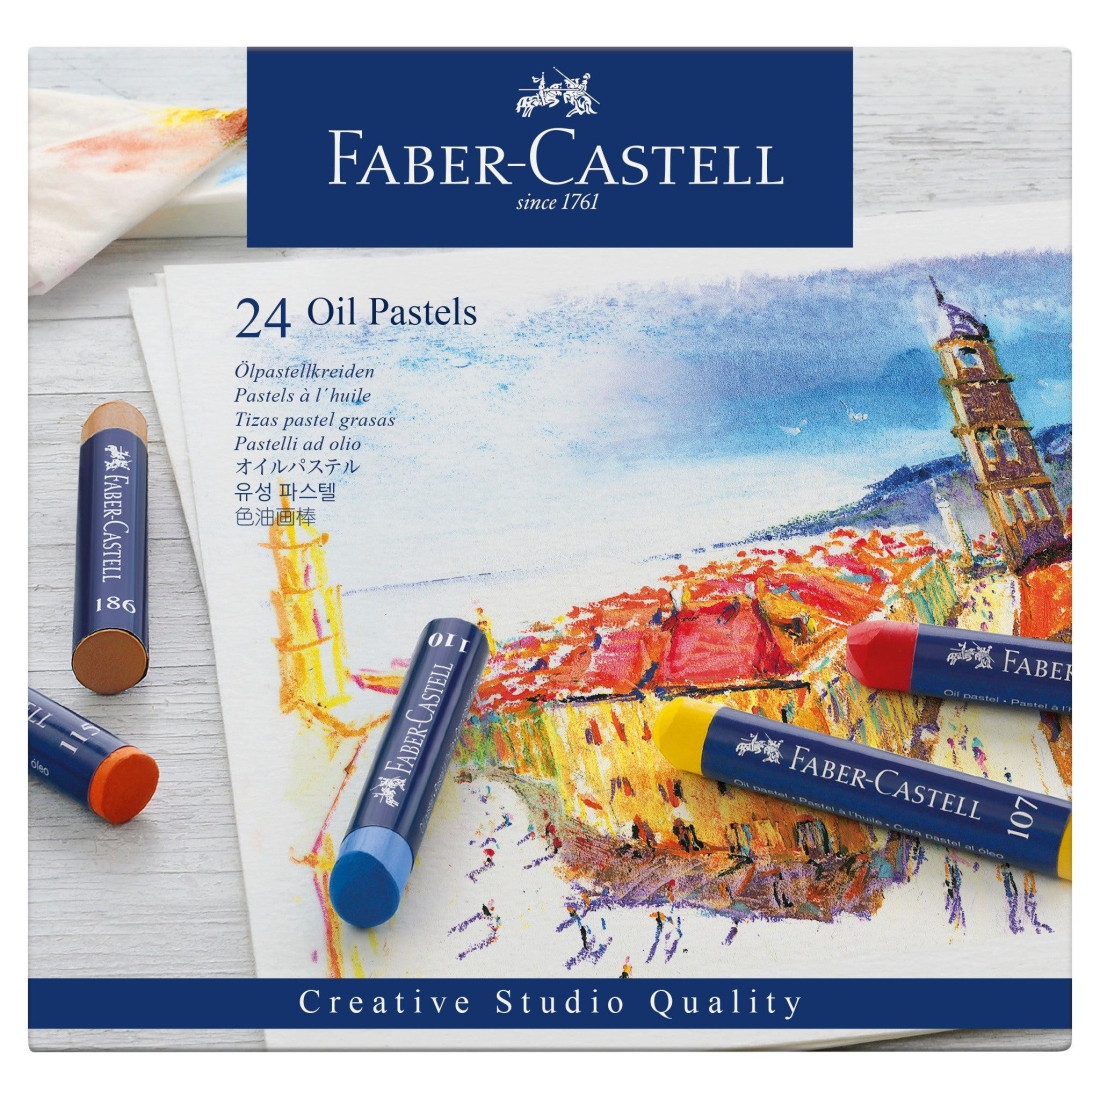 Faber Castell Oil Pastel Crayons Box of 24, 127024